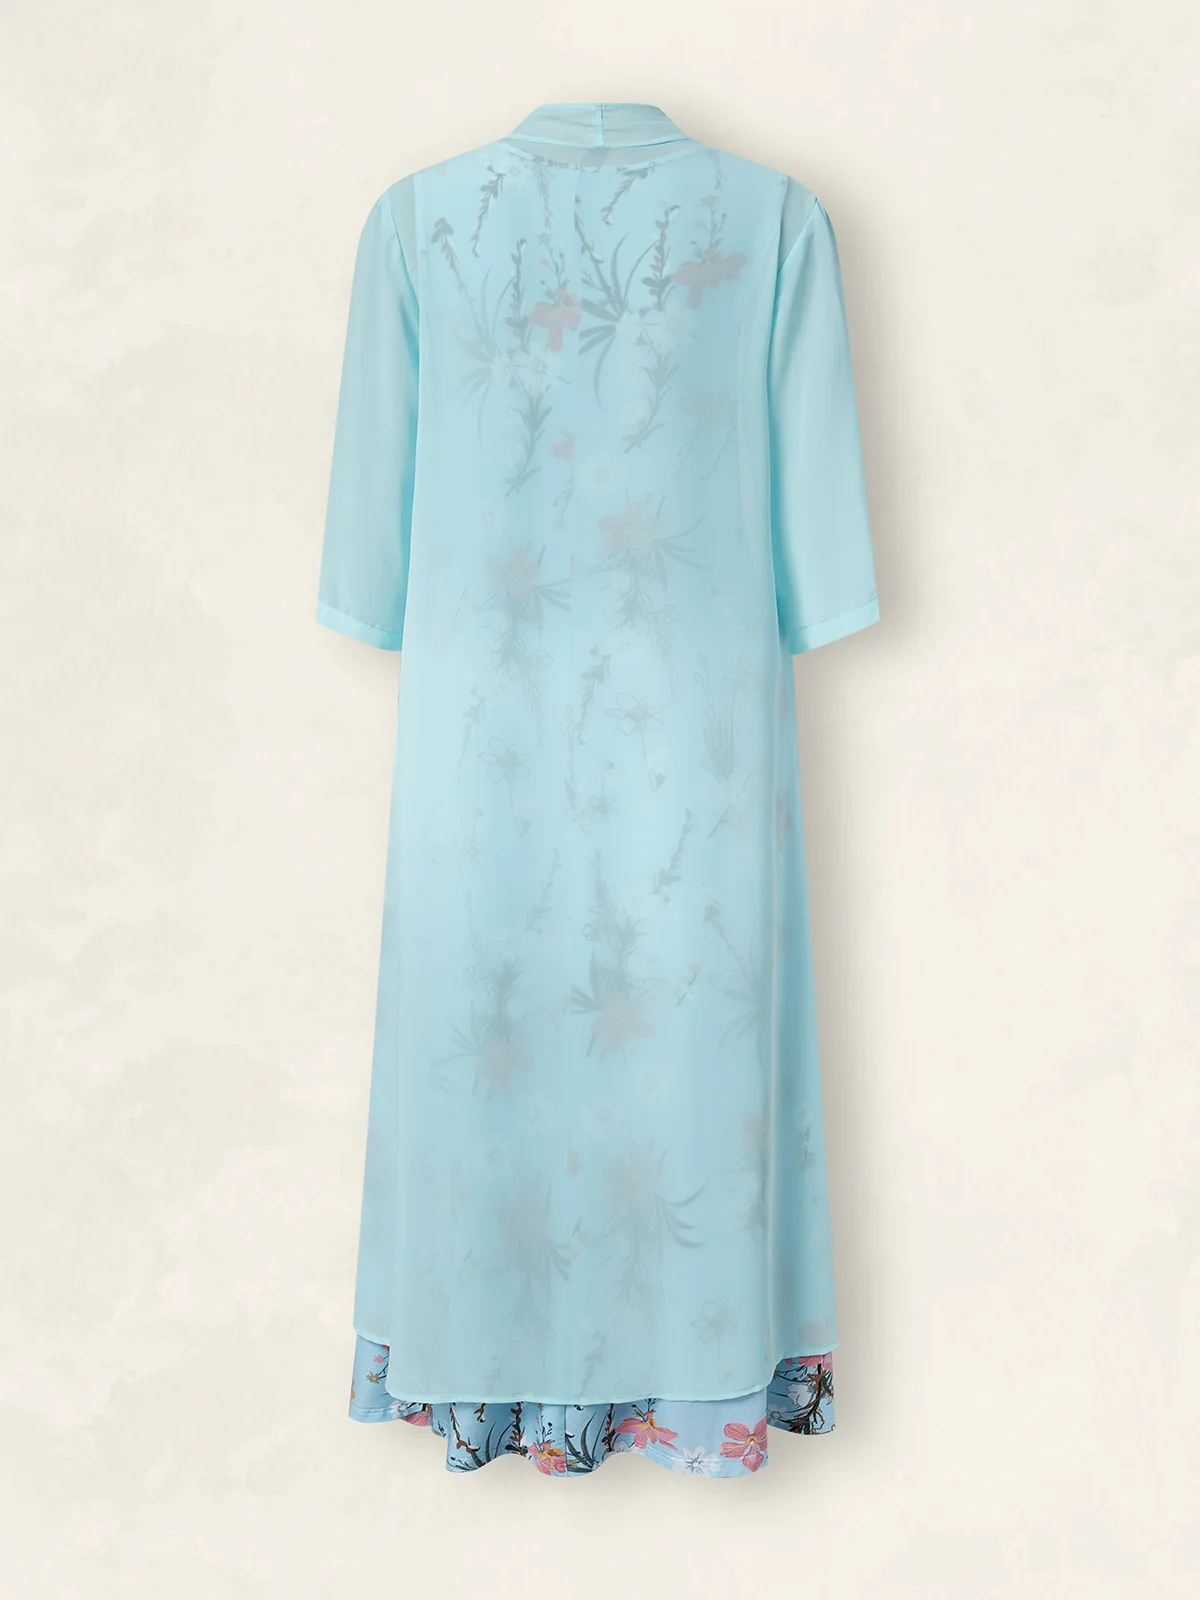 Floral Printed Round Neck Long Casual Sky Blue Dress-Two Piece Set